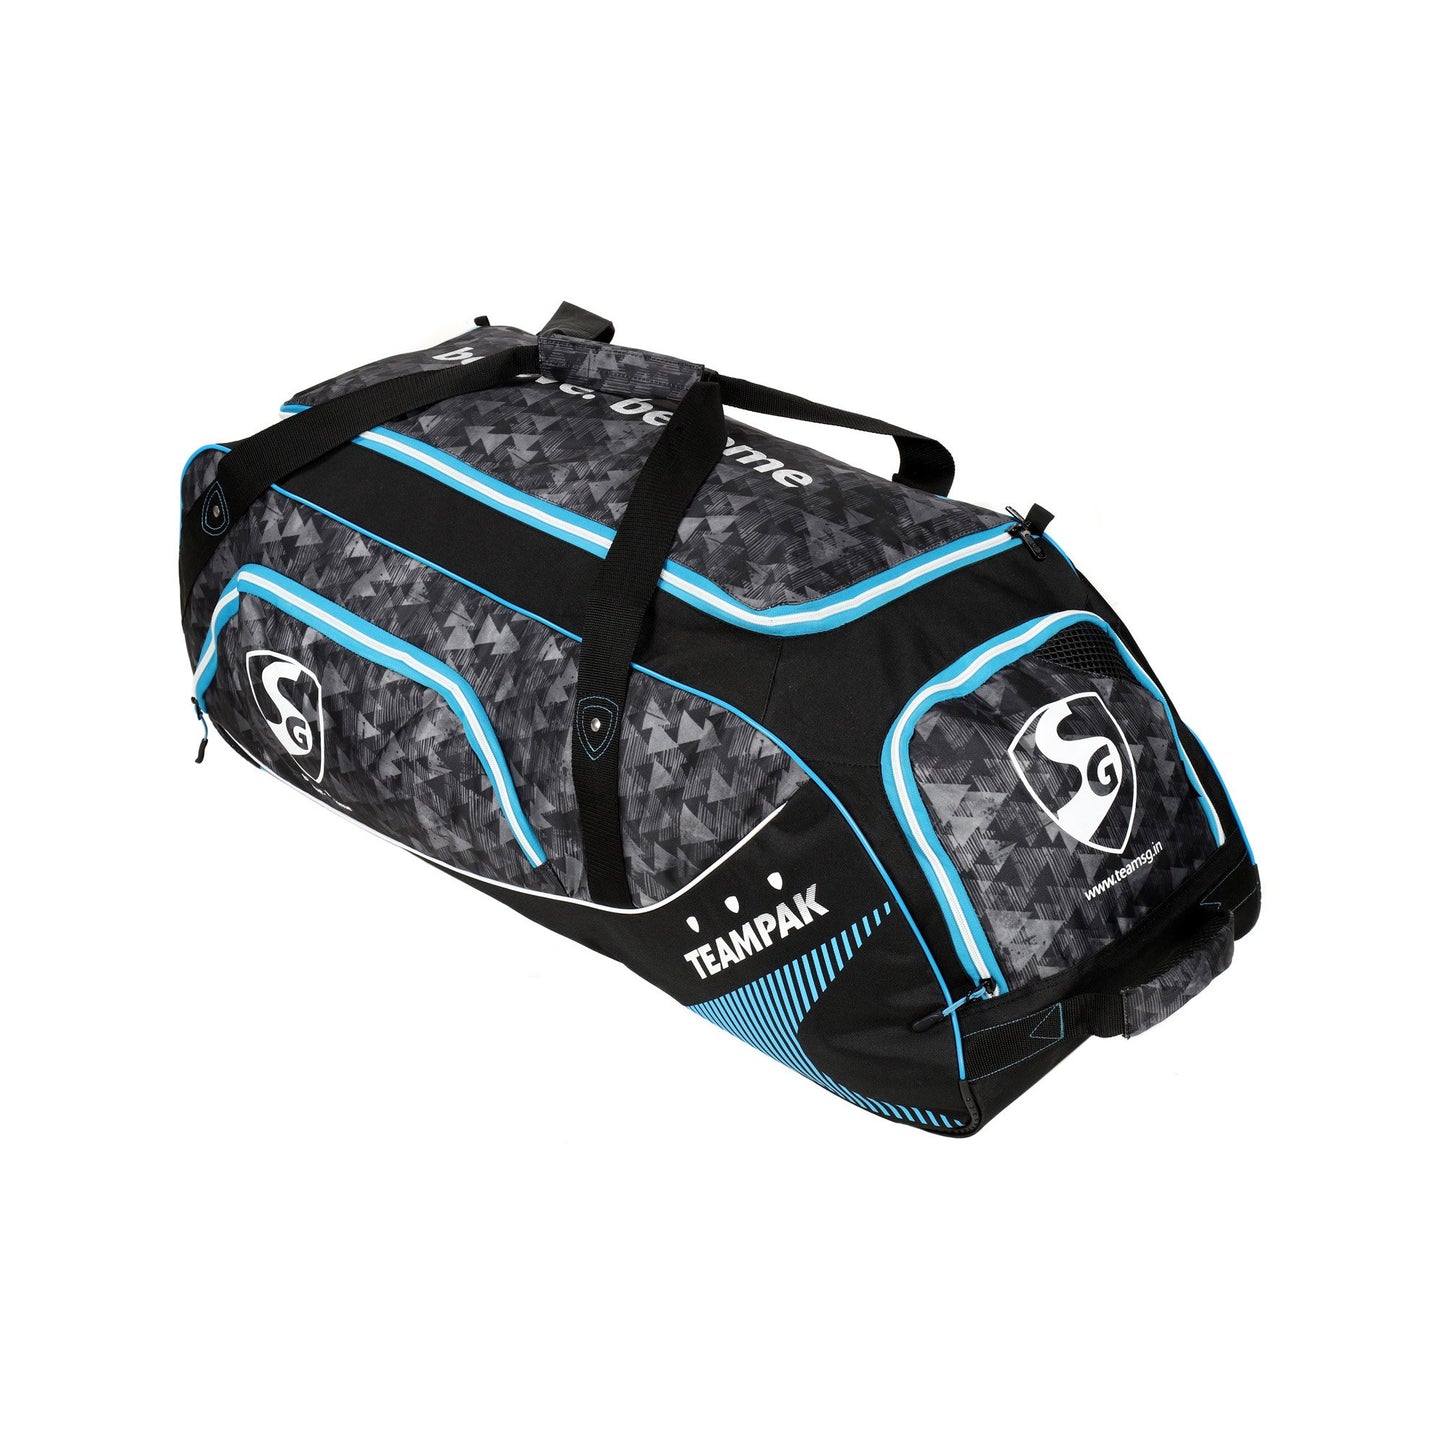 SG Teampak kit bag with shoe compartment and wheels